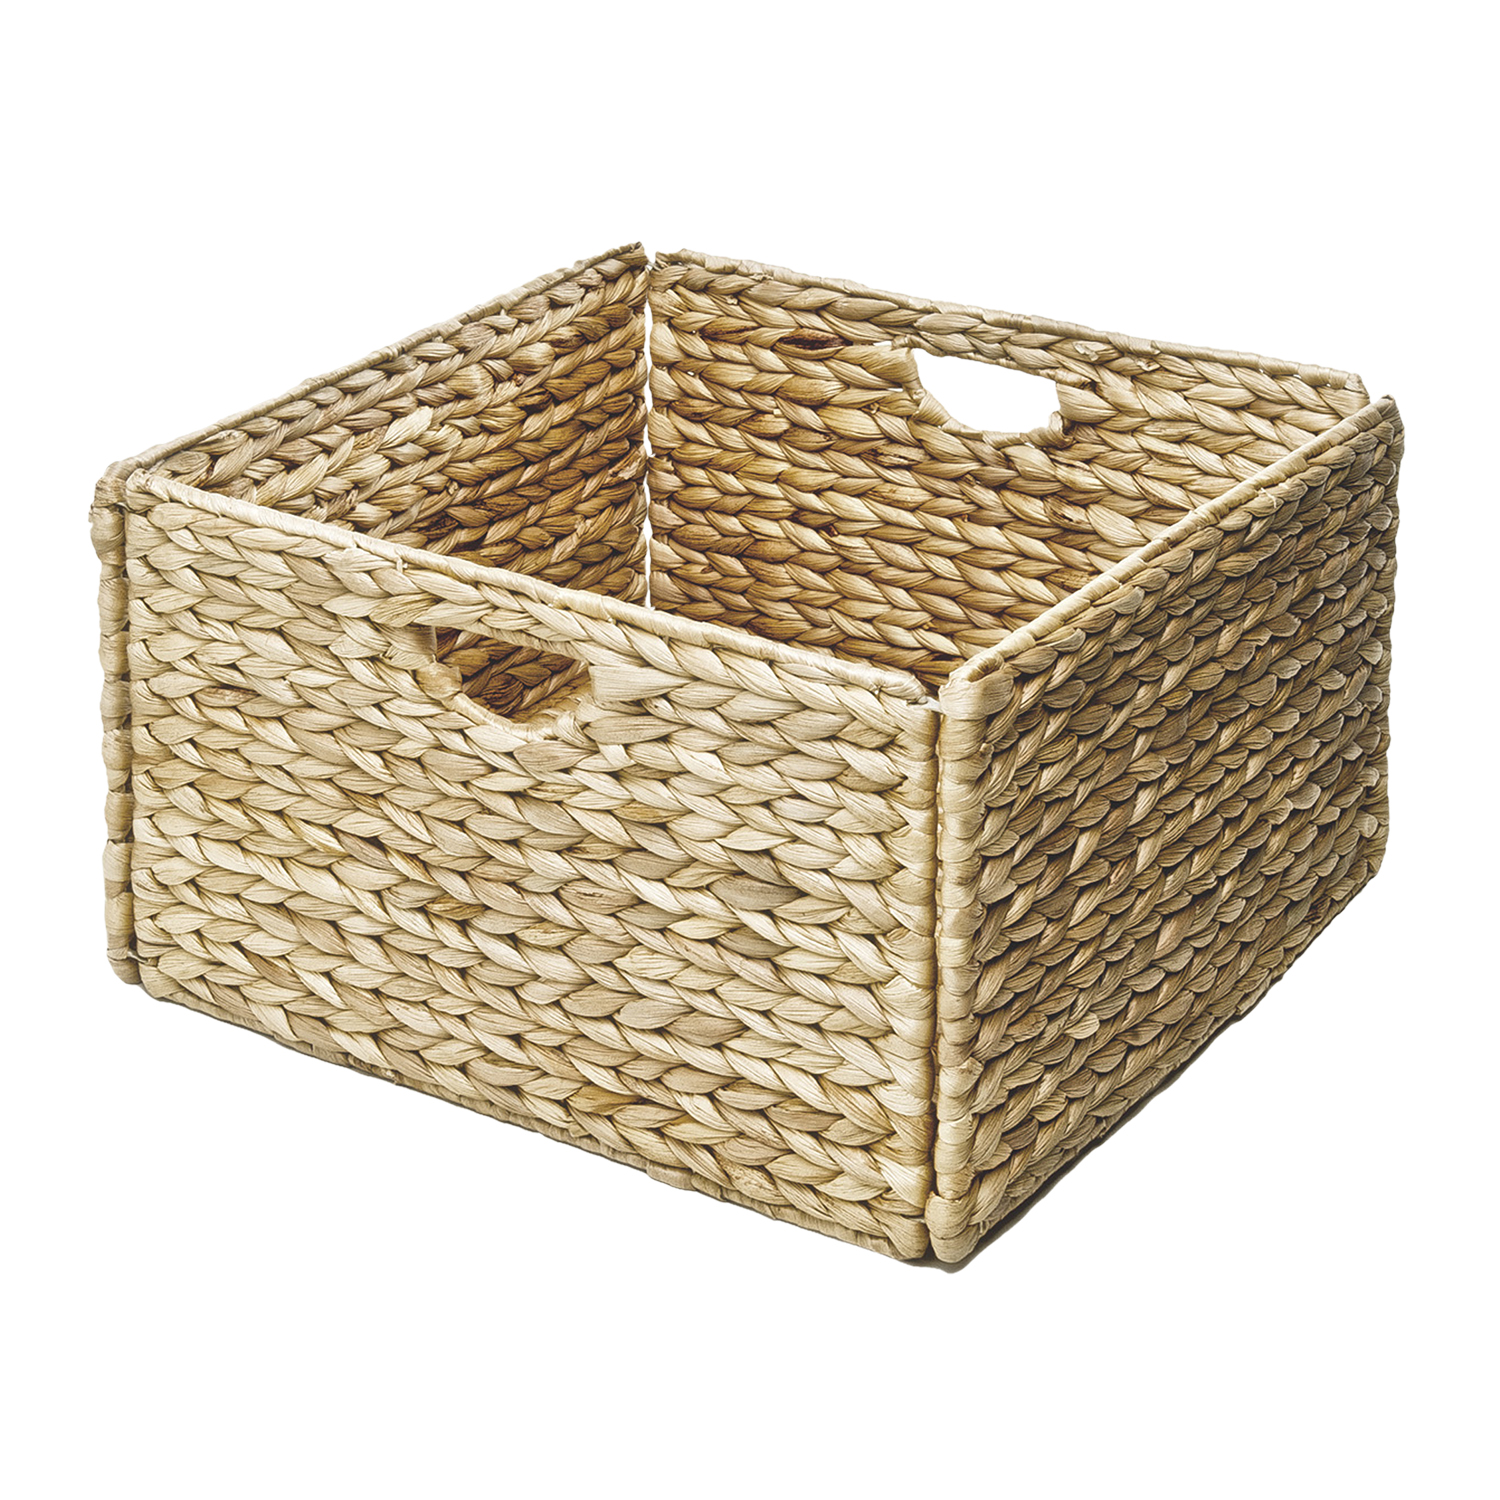 Seville Classics 13 in. x 8 in. Woven Hyacinth Storage Basket (2-Pack)-WEB168 - image 5 of 7